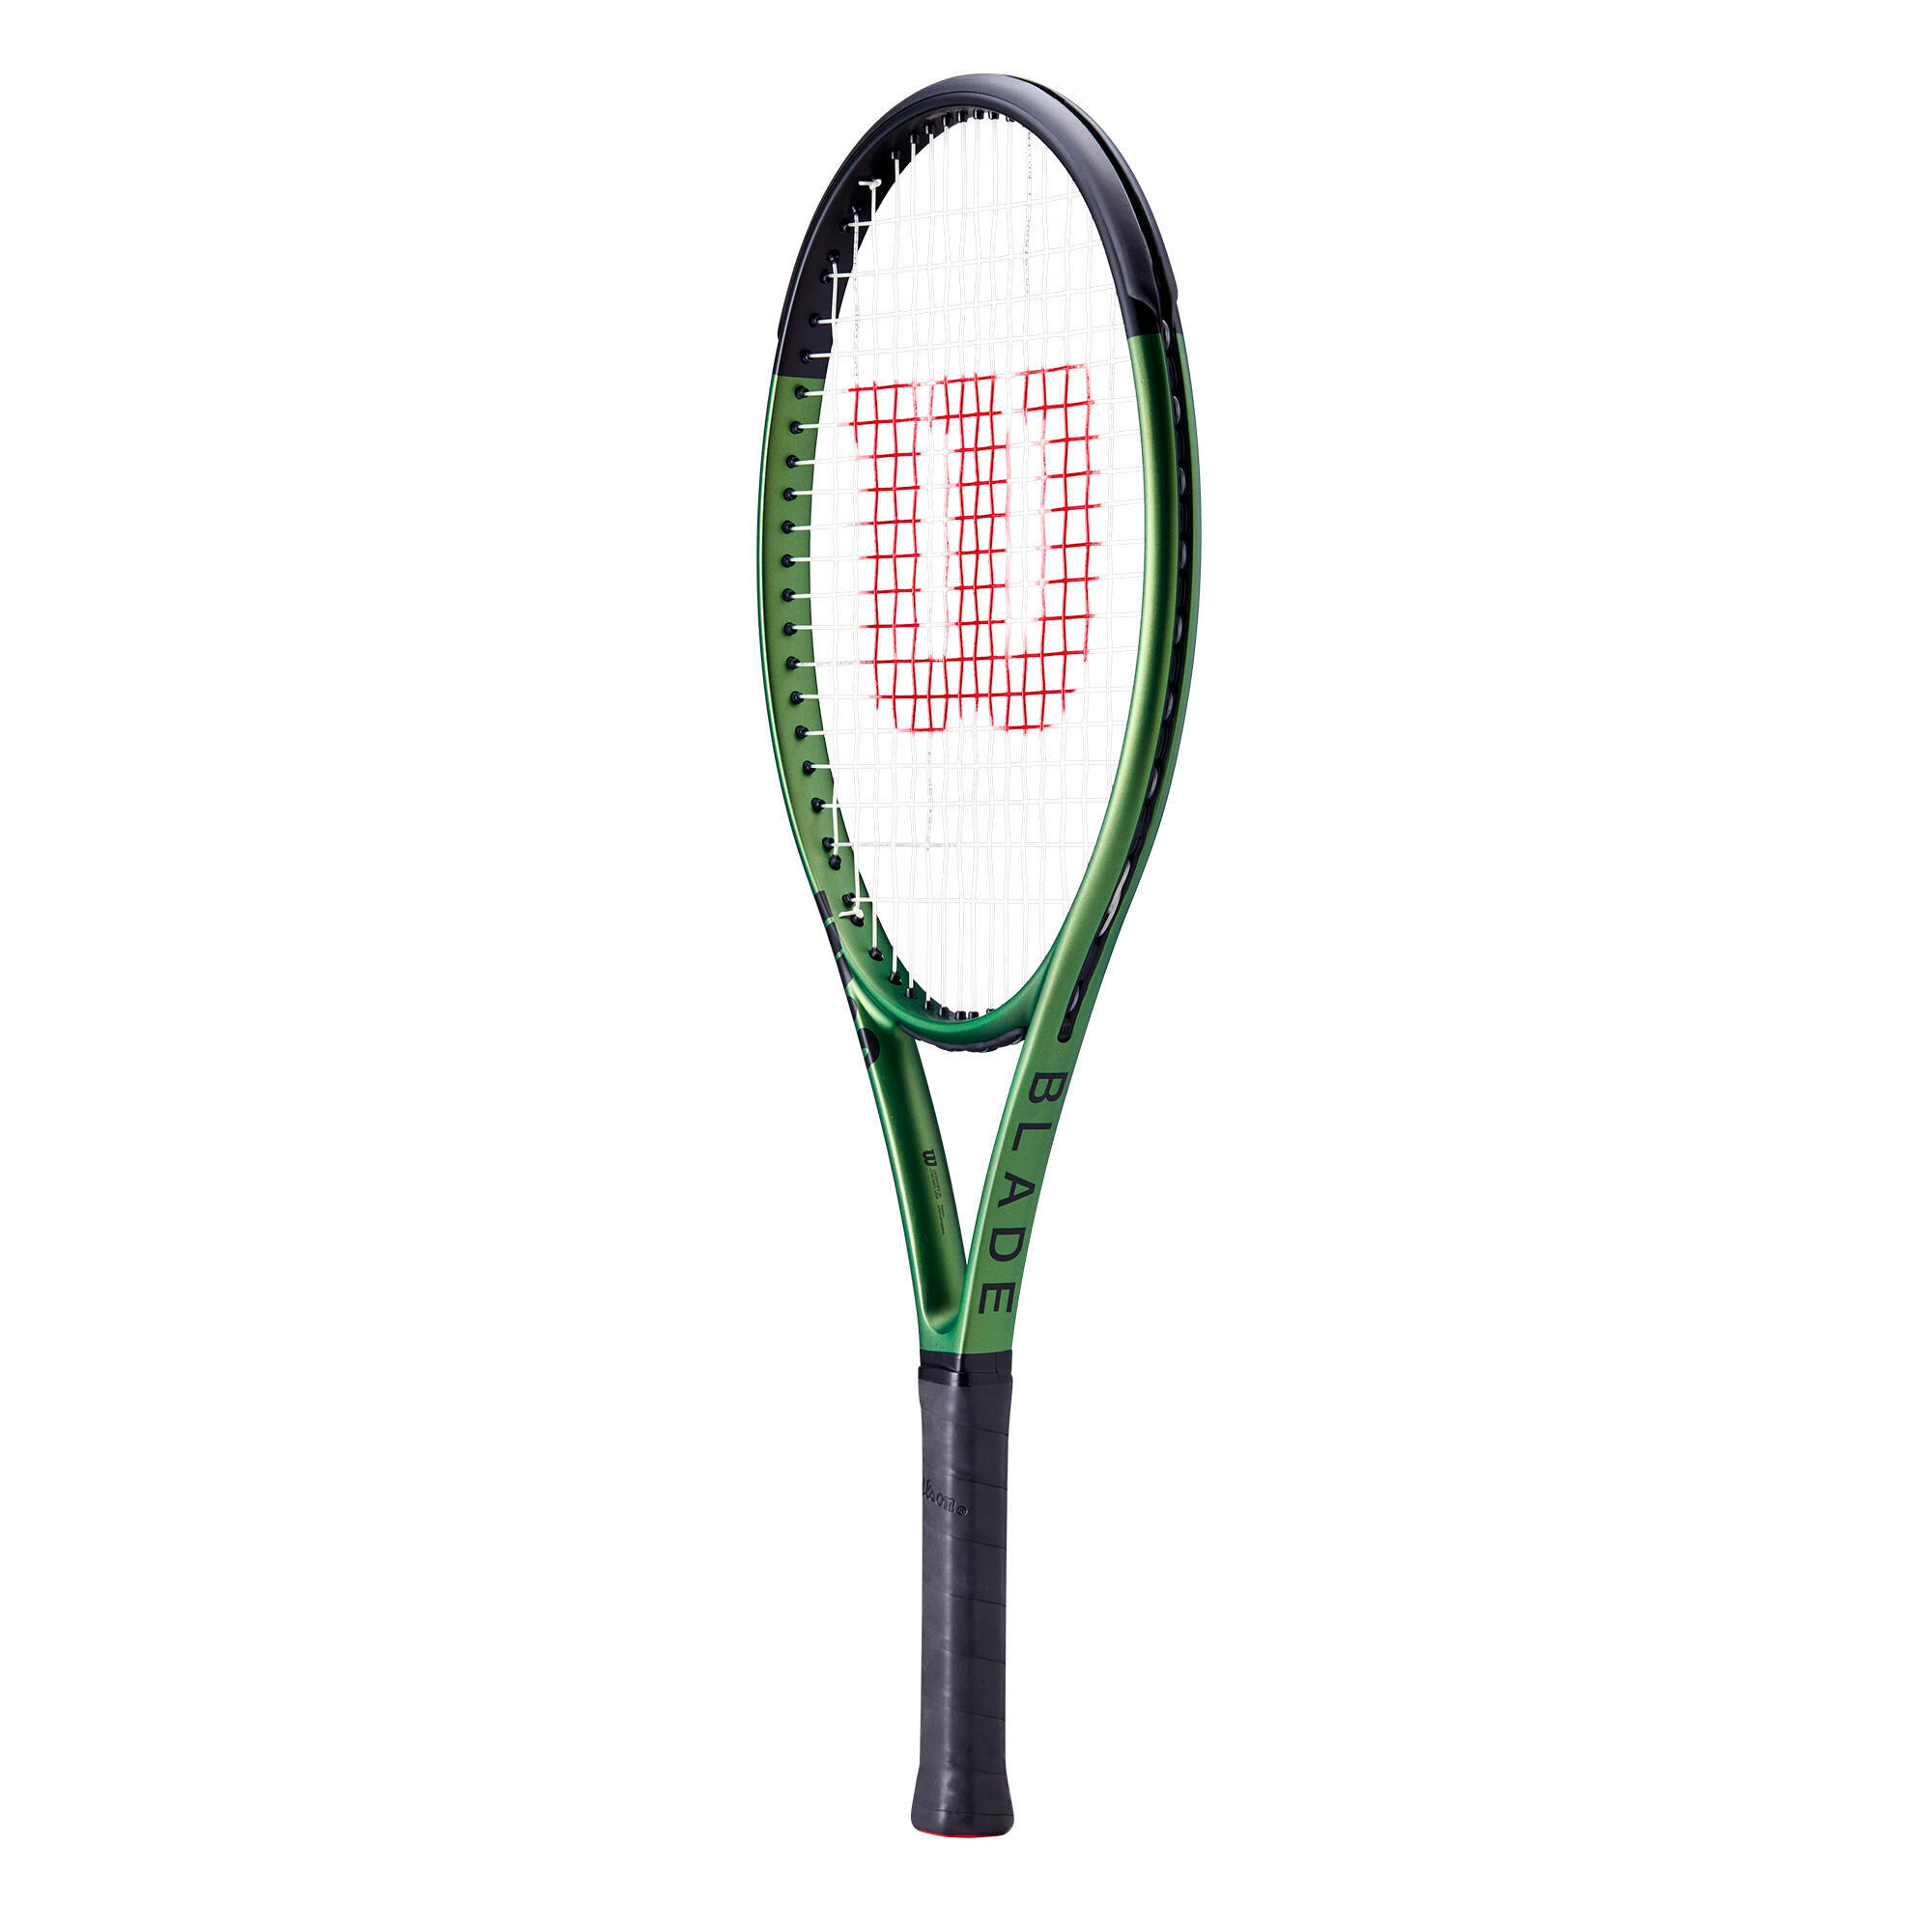 Kids' Tennis Racket Blade V8 25 inches - Green/Copper 3/3